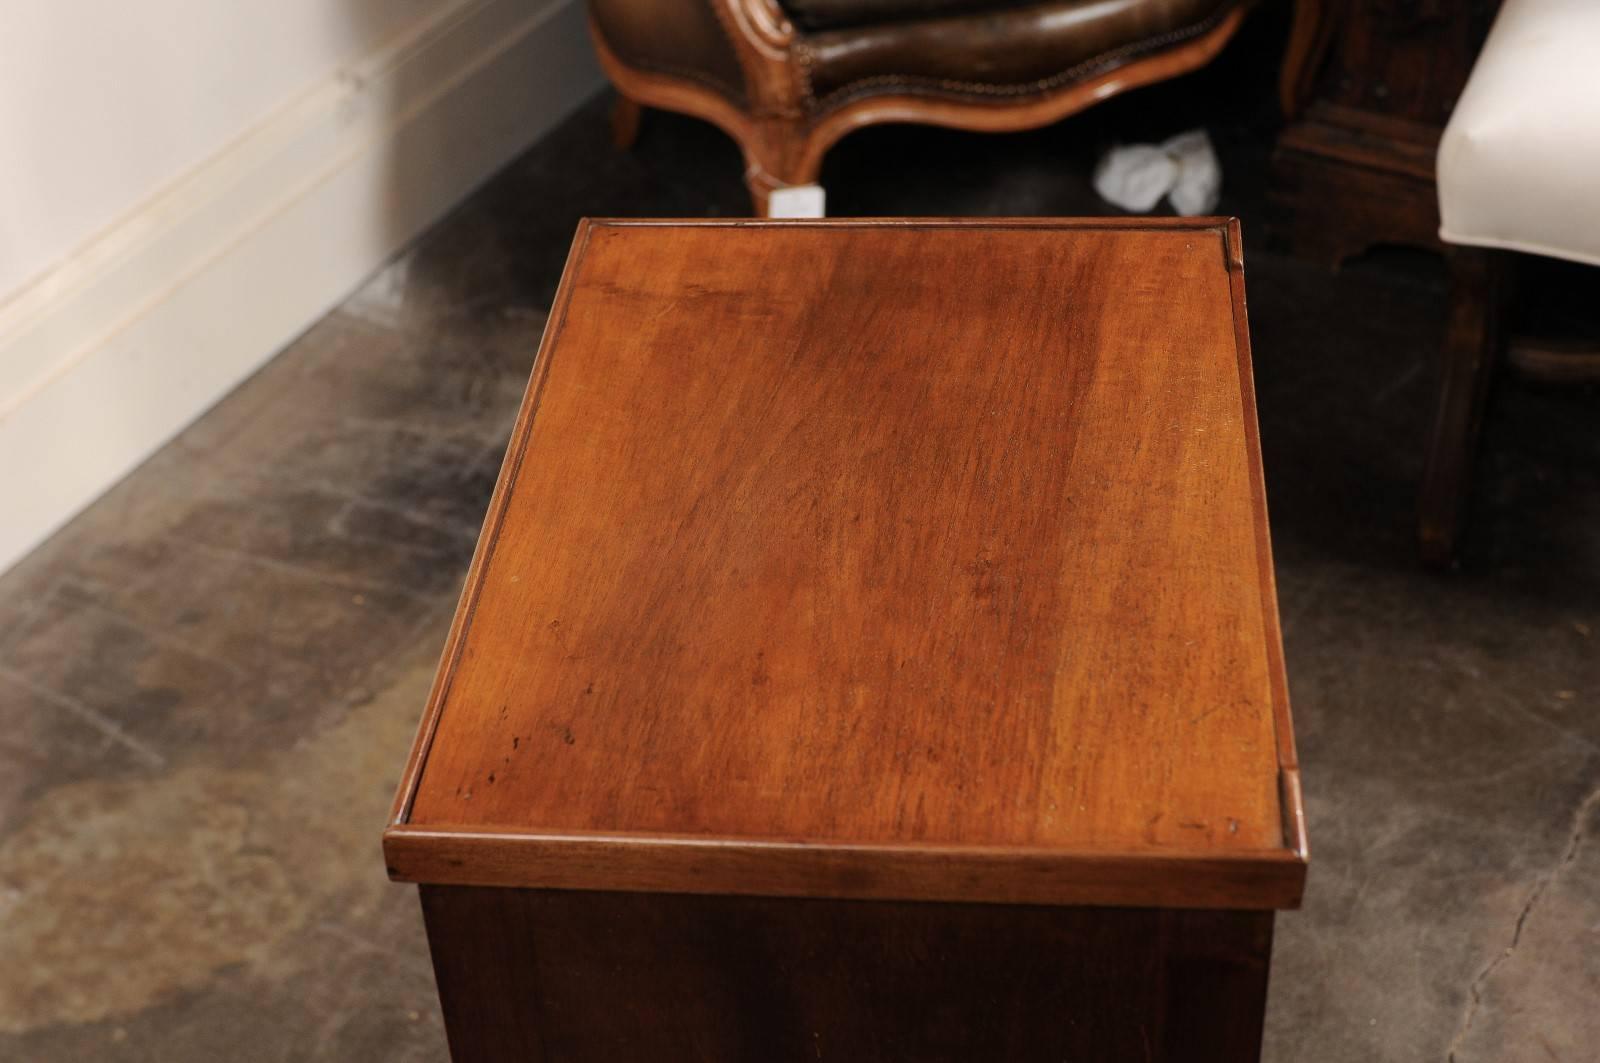 Brass French Mahogany Turn of the Century Side Table with Two Drawers and Tapered Legs